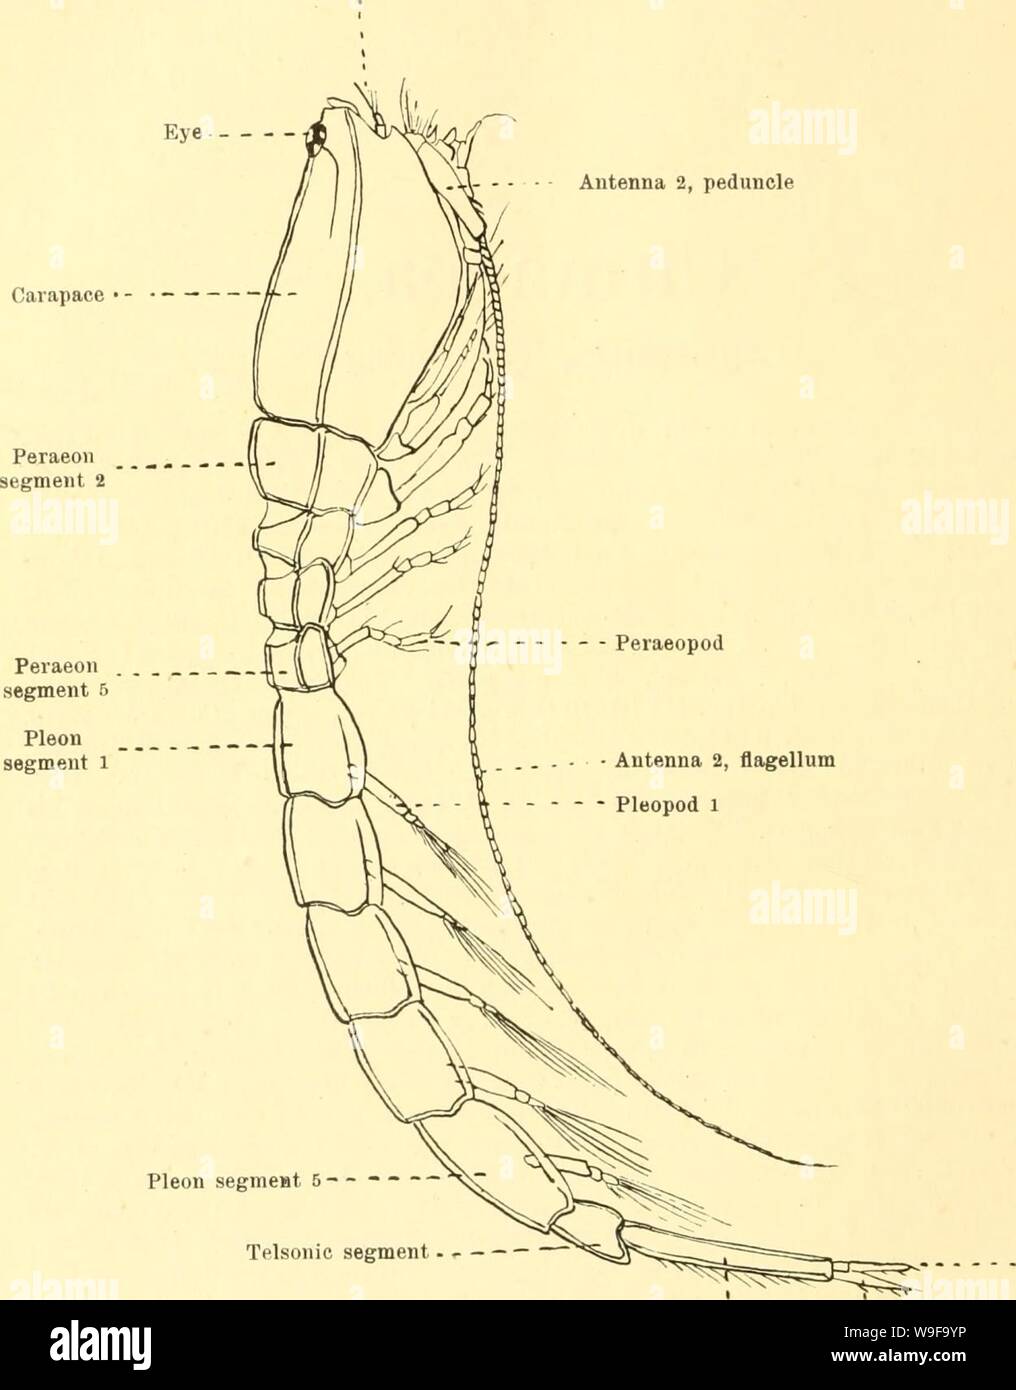 Archive image from page 25 of Cumacea (Sympoda) (1913). Cumacea (Sympoda)  cumaceasympoda00steb Year: 1913 ( Cumacea first, second, and third, with the carapace and of one with an- other among themselves, each limb of the first pair having its Antenna i Antenna 2, peduncle Carapace    Antenna 2, flageUum Pleopod 1 Pleon segmeiat 5- Telsonic segment - ' Exopod of uropod Uropod peduncle Fig. 1. Bodotria arenosa (after G. 0. Sars). Endopod of uropod exopod or swimming-branch, an appendage which may or may not recur on any or all of the three following pairs but is never found on the fifth pair; 3 Stock Photo